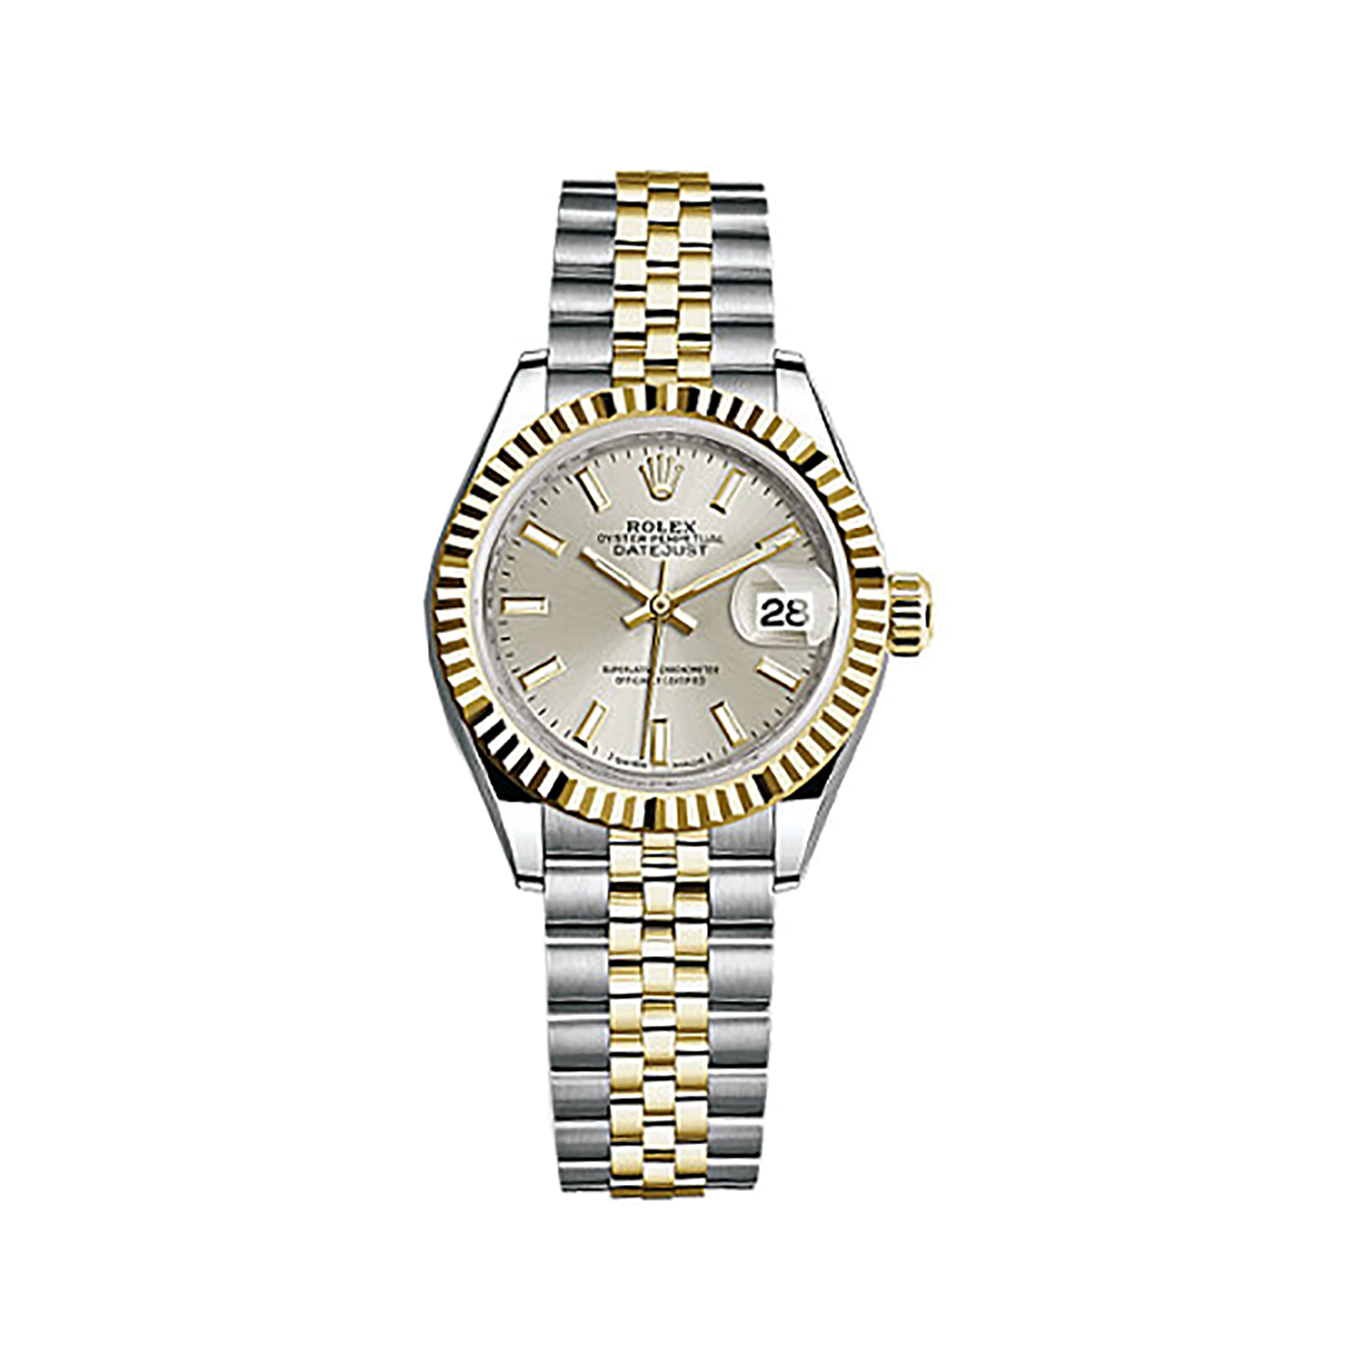 Lady-Datejust 28 279173 Gold & Stainless Steel Watch (Silver)